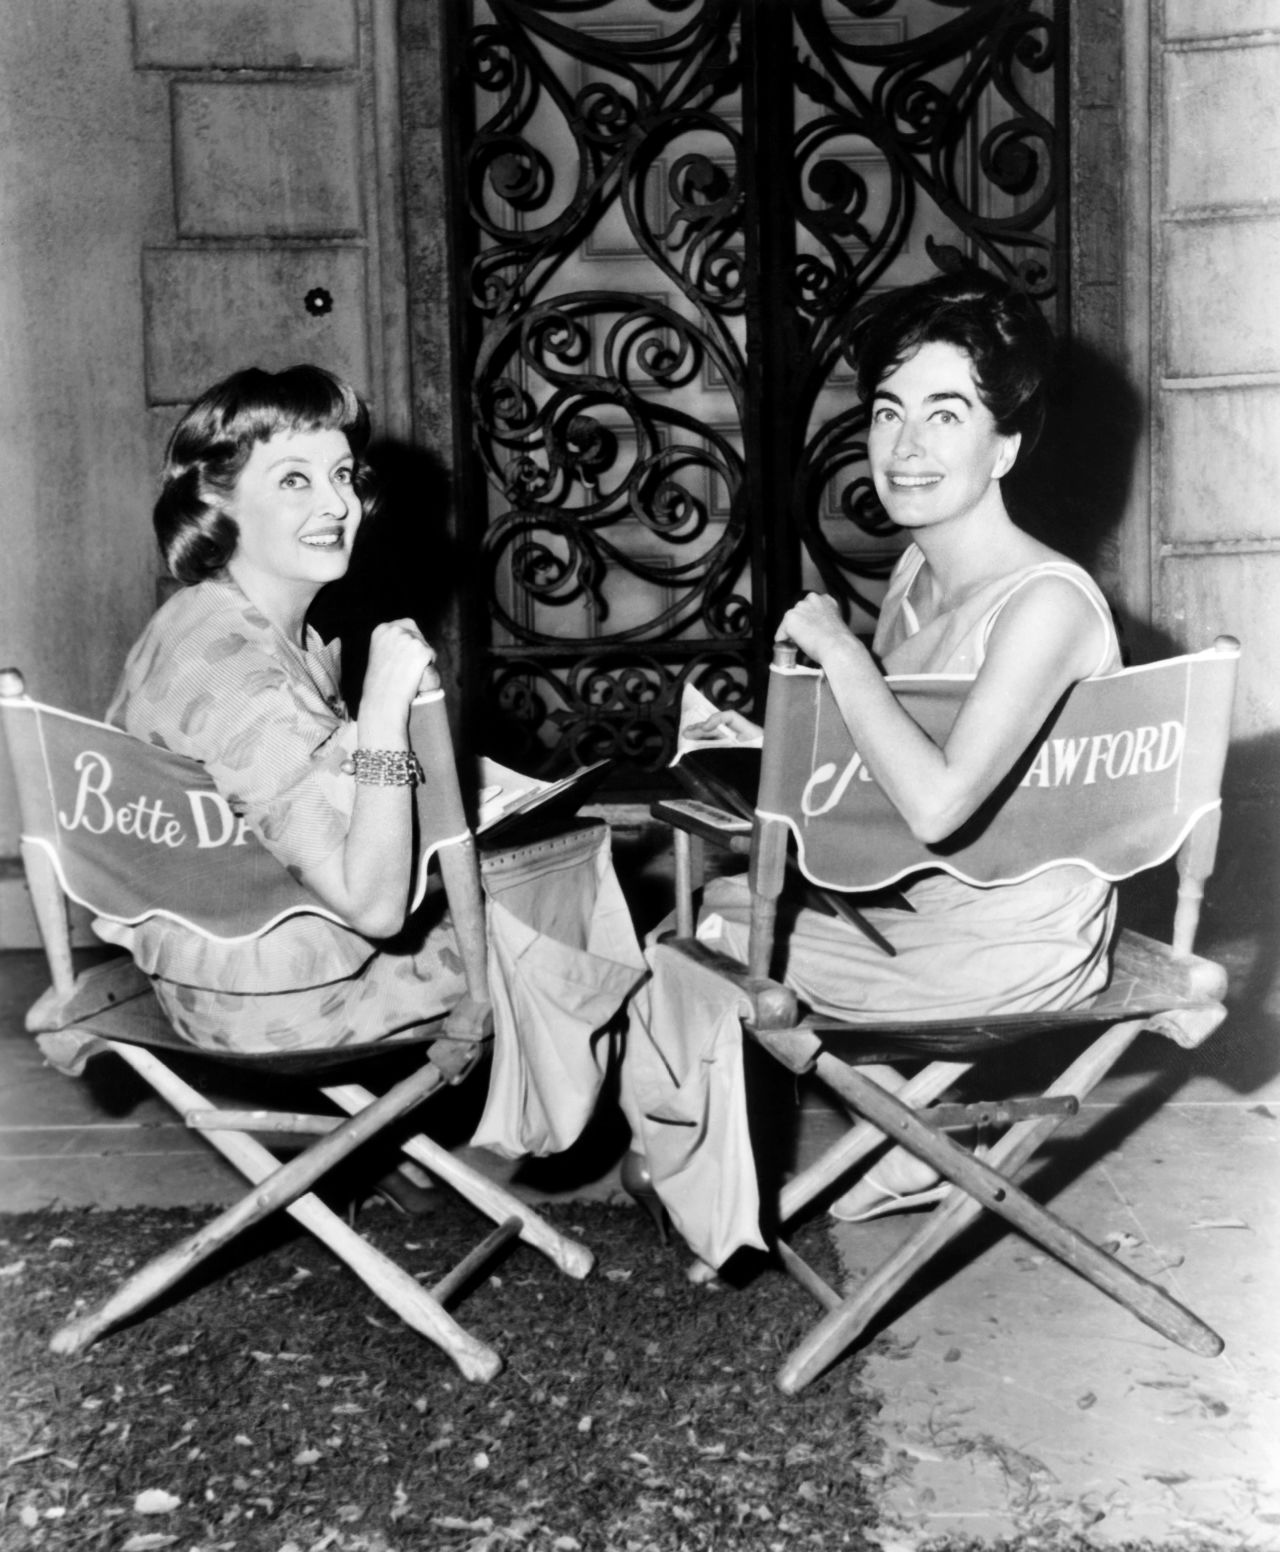 "Hollywood T.N.T." is how The New York Times characterized the explosive teaming of Bette Davis, left, and Joan Crawford in the 1962 movie "What Ever Happened to Baby Jane?" Davis and Crawford were two of the biggest stars of the 1930s and '40s, but by the early '60s, roles for actresses in their 50s were scarce. Despite their dislike for each other, they leapt at the chance for meaty parts in the low-budget horror flick based on a novel by Henry Farrell.